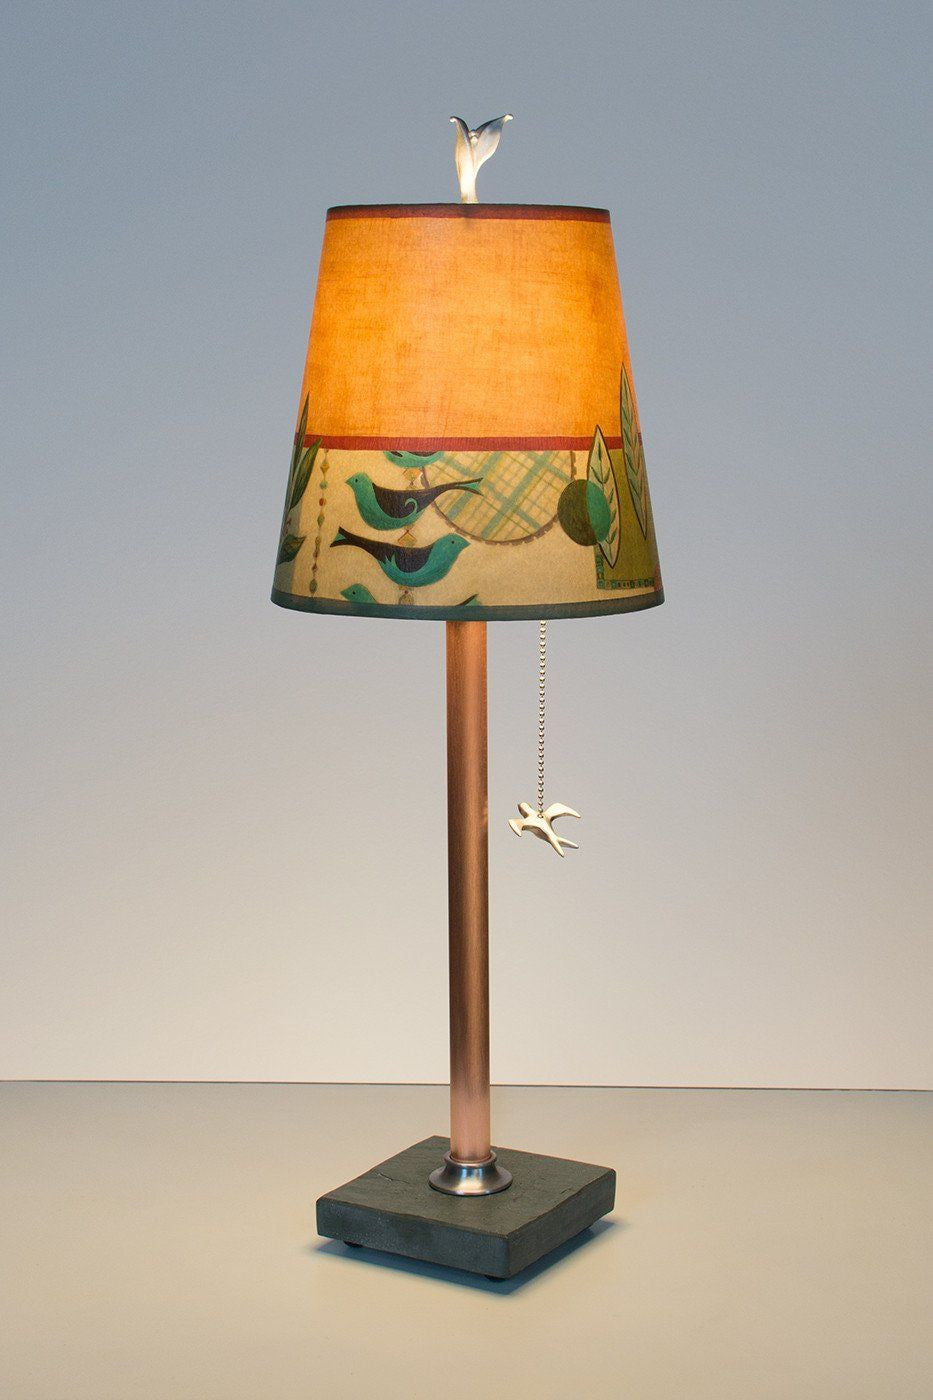 Janna Ugone &amp; Co Table Lamps Copper Table Lamp with Small Drum Shade in New Capri Spice